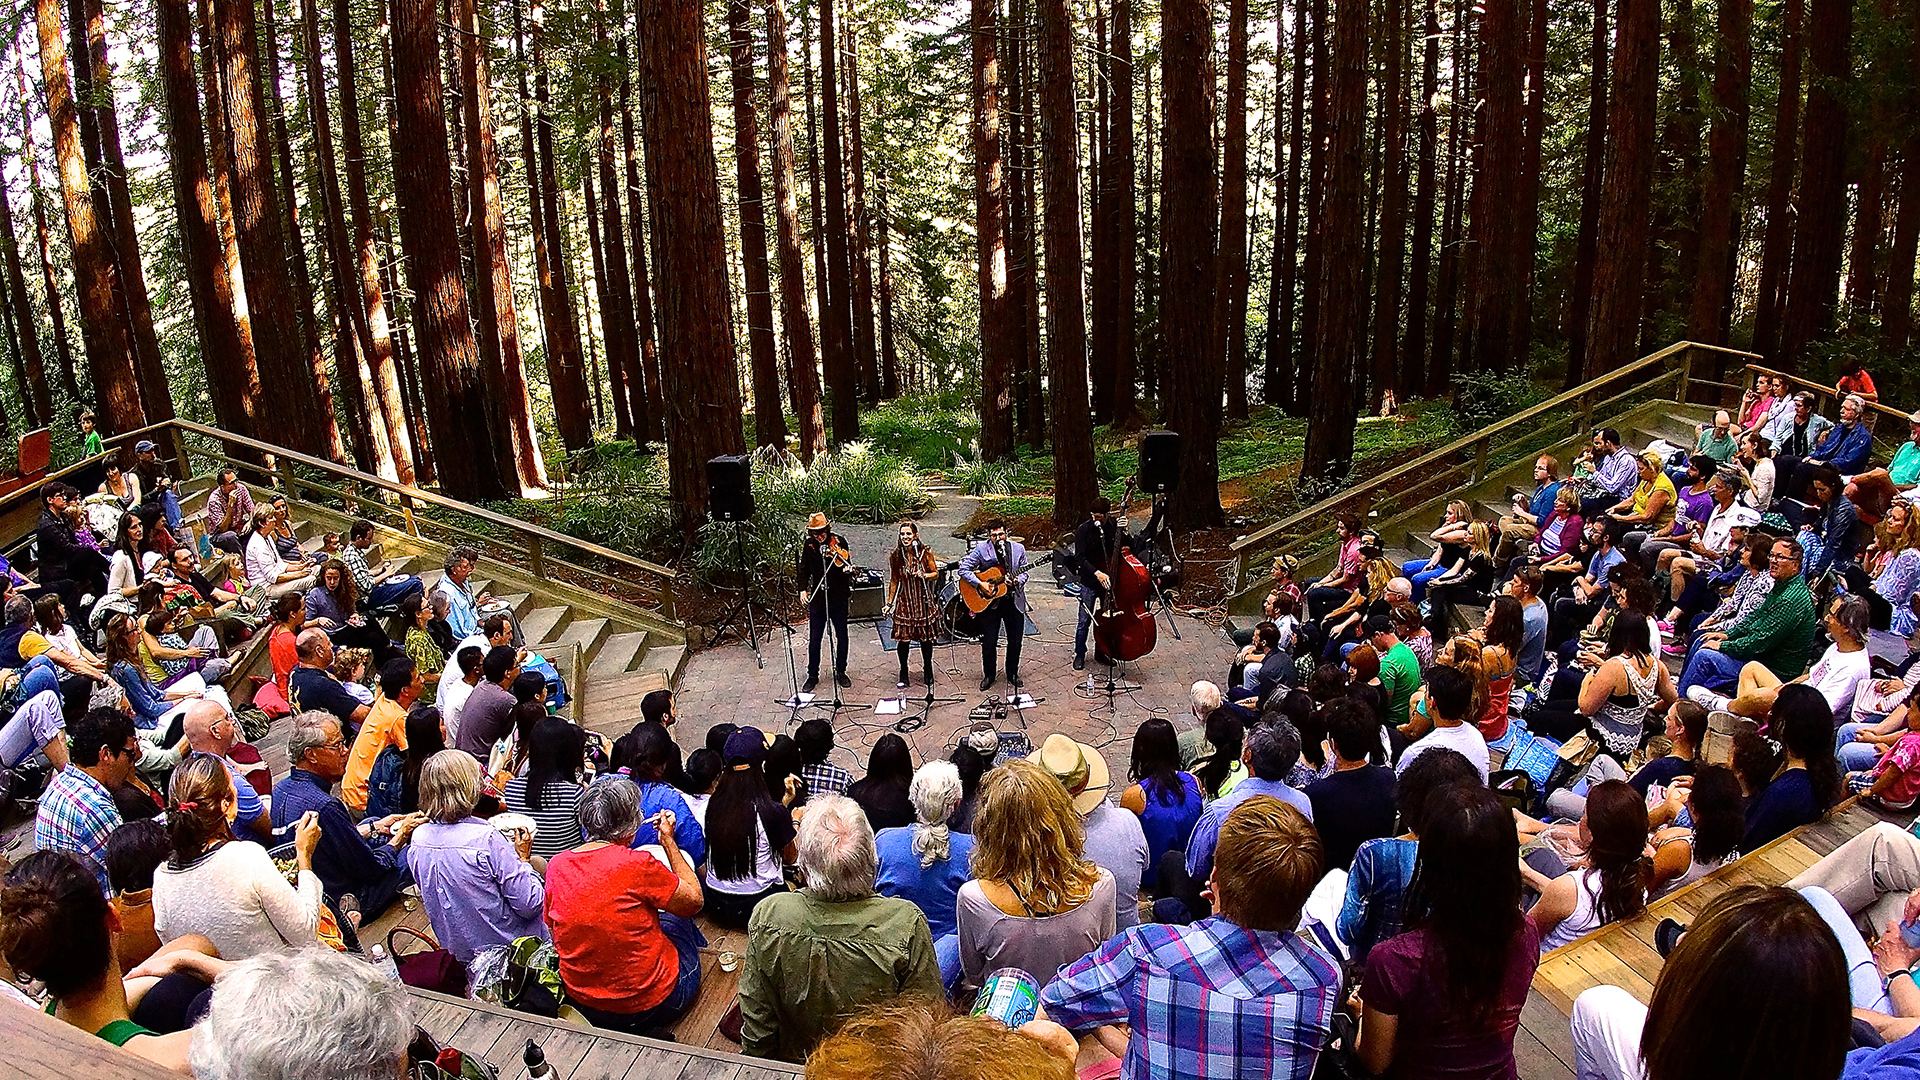 four musicians perform in a redwood grove at the UC Botanical Garden as an audience watches from an amphitheater above.